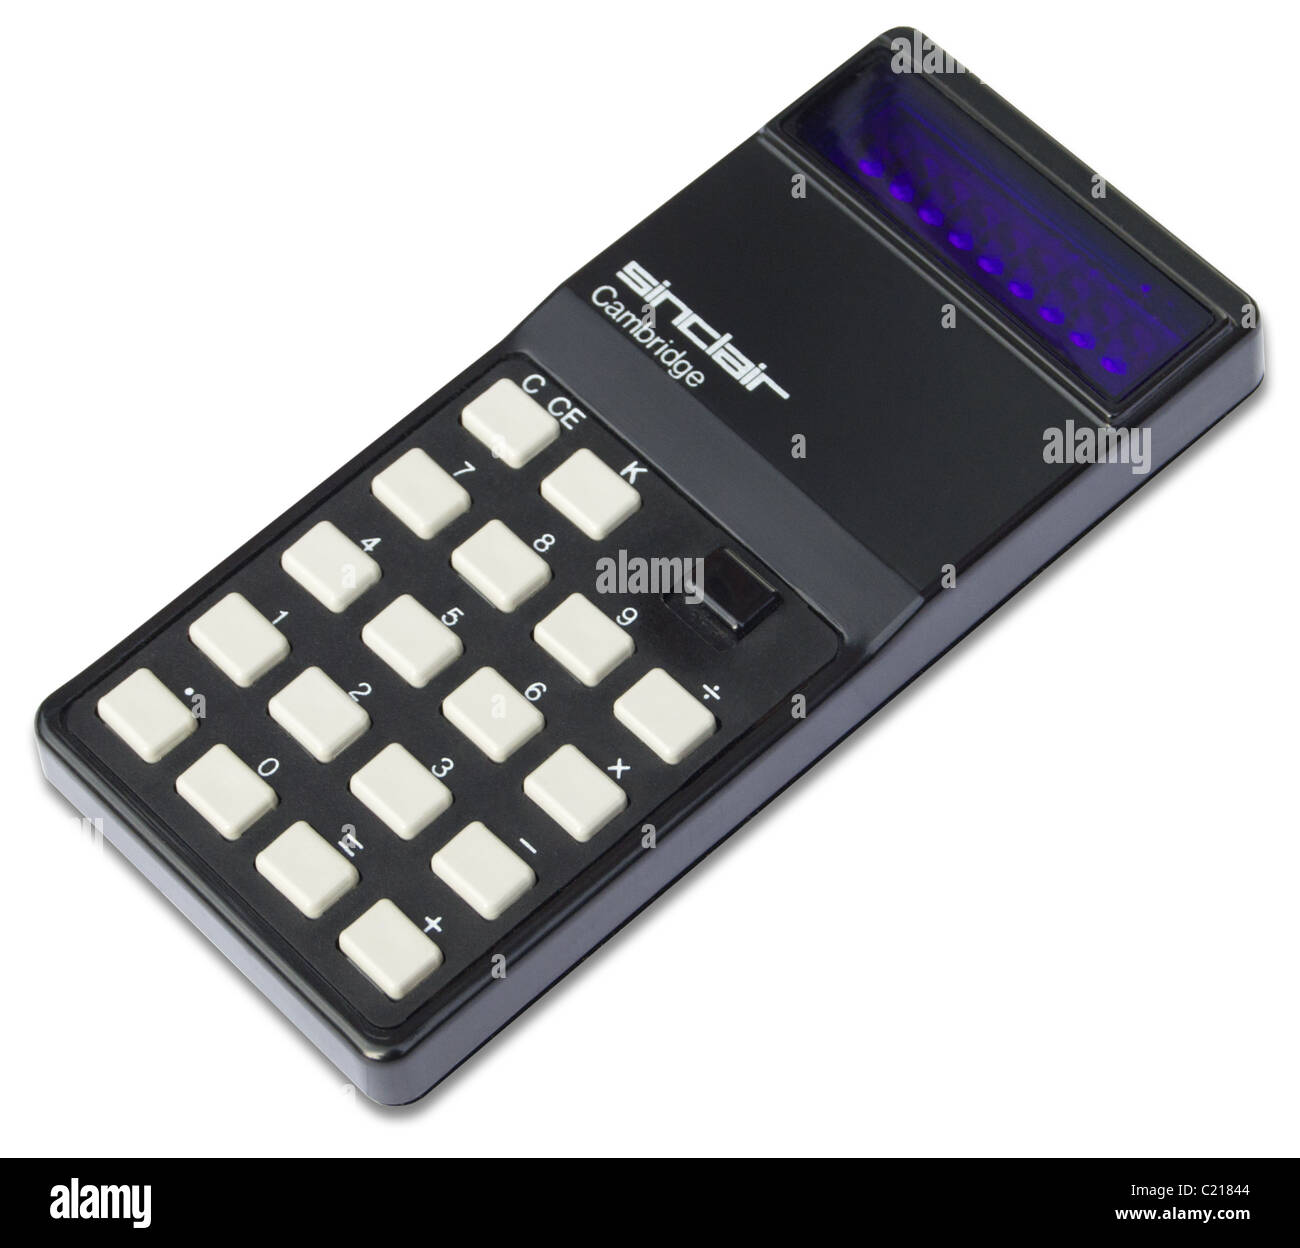 Sinclair Cambridge calculator from the 1970s (cutout, with drop shadow) Stock Photo